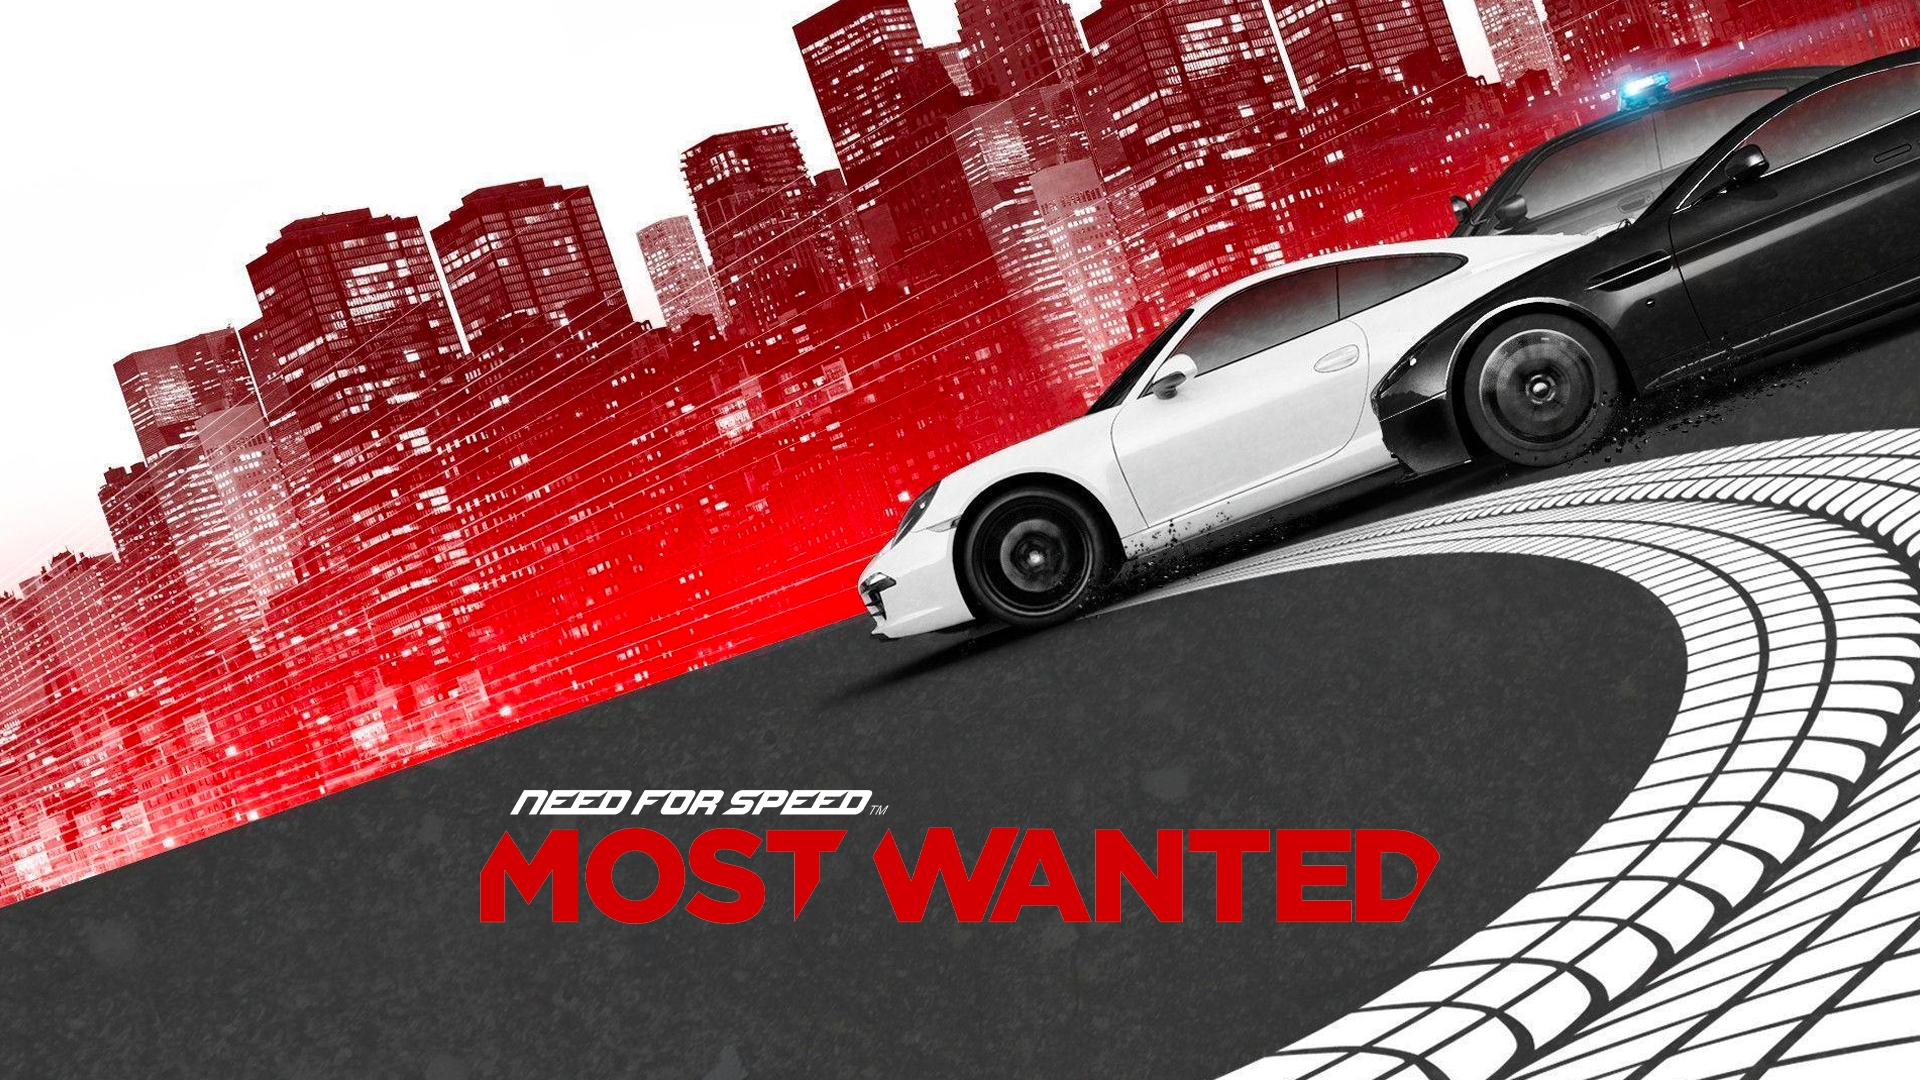 Buy Need For Speed: Most Wanted 2012 Origin